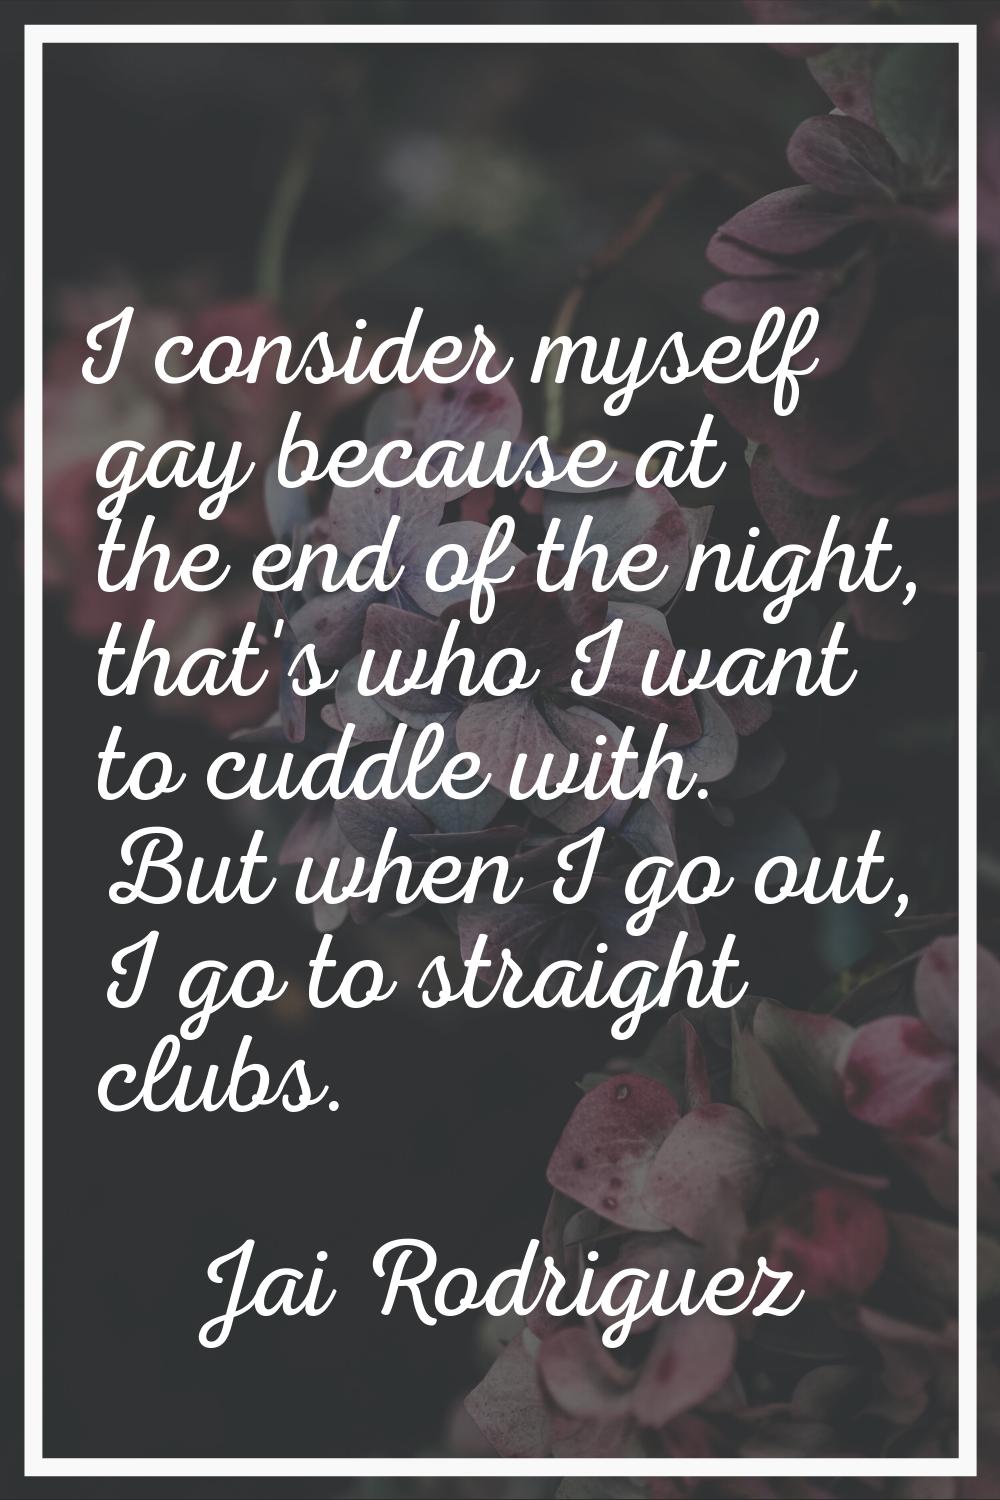 I consider myself gay because at the end of the night, that's who I want to cuddle with. But when I